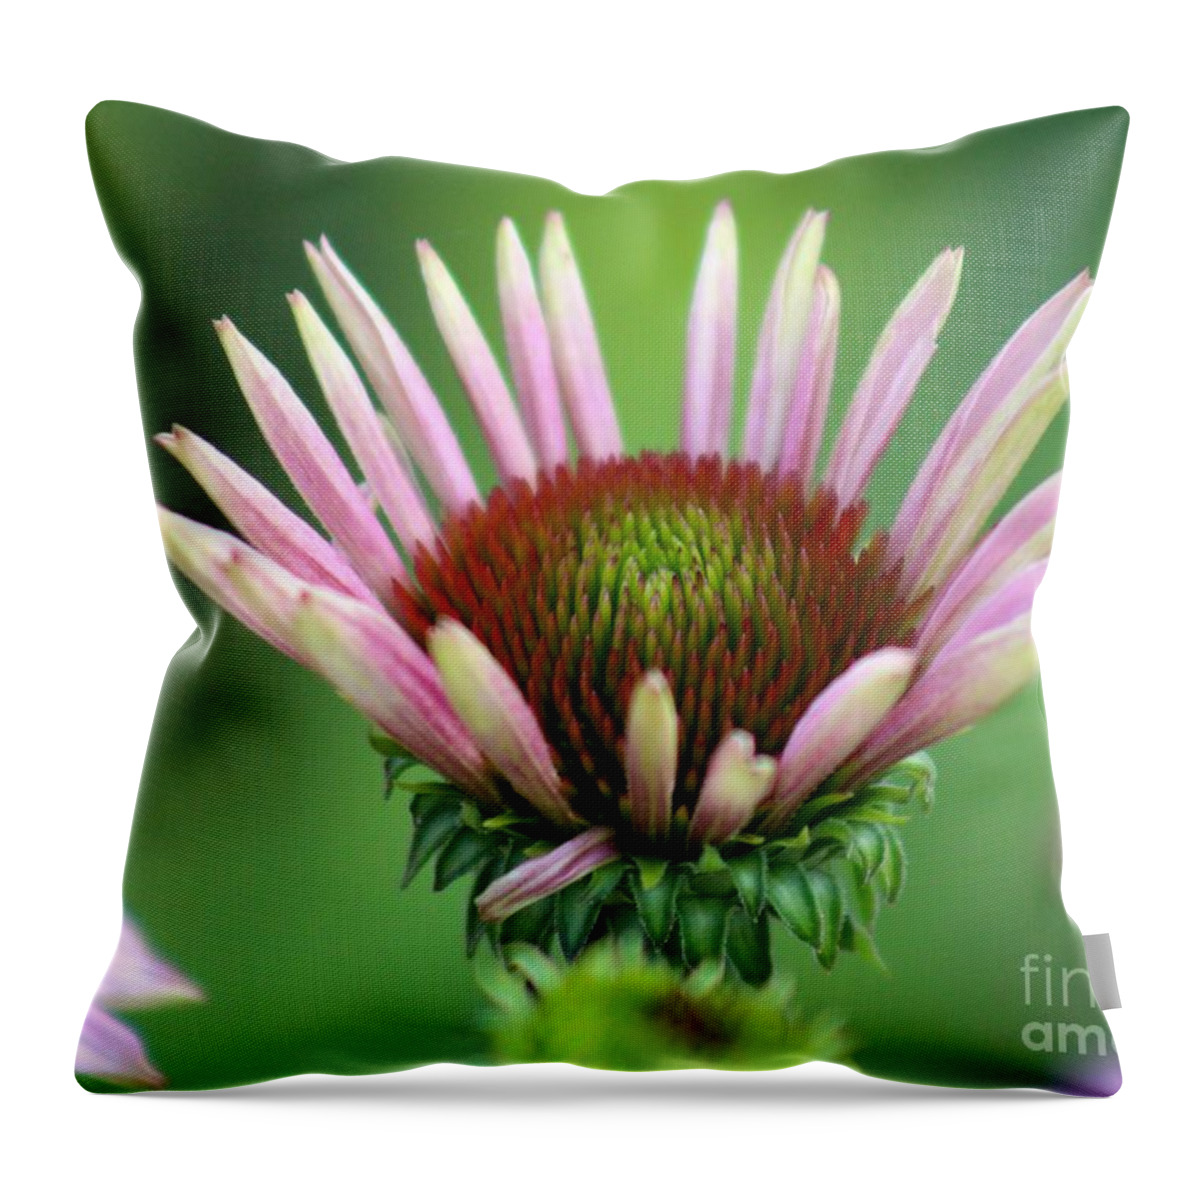 Pink Throw Pillow featuring the photograph Nature's Beauty 75 by Deena Withycombe